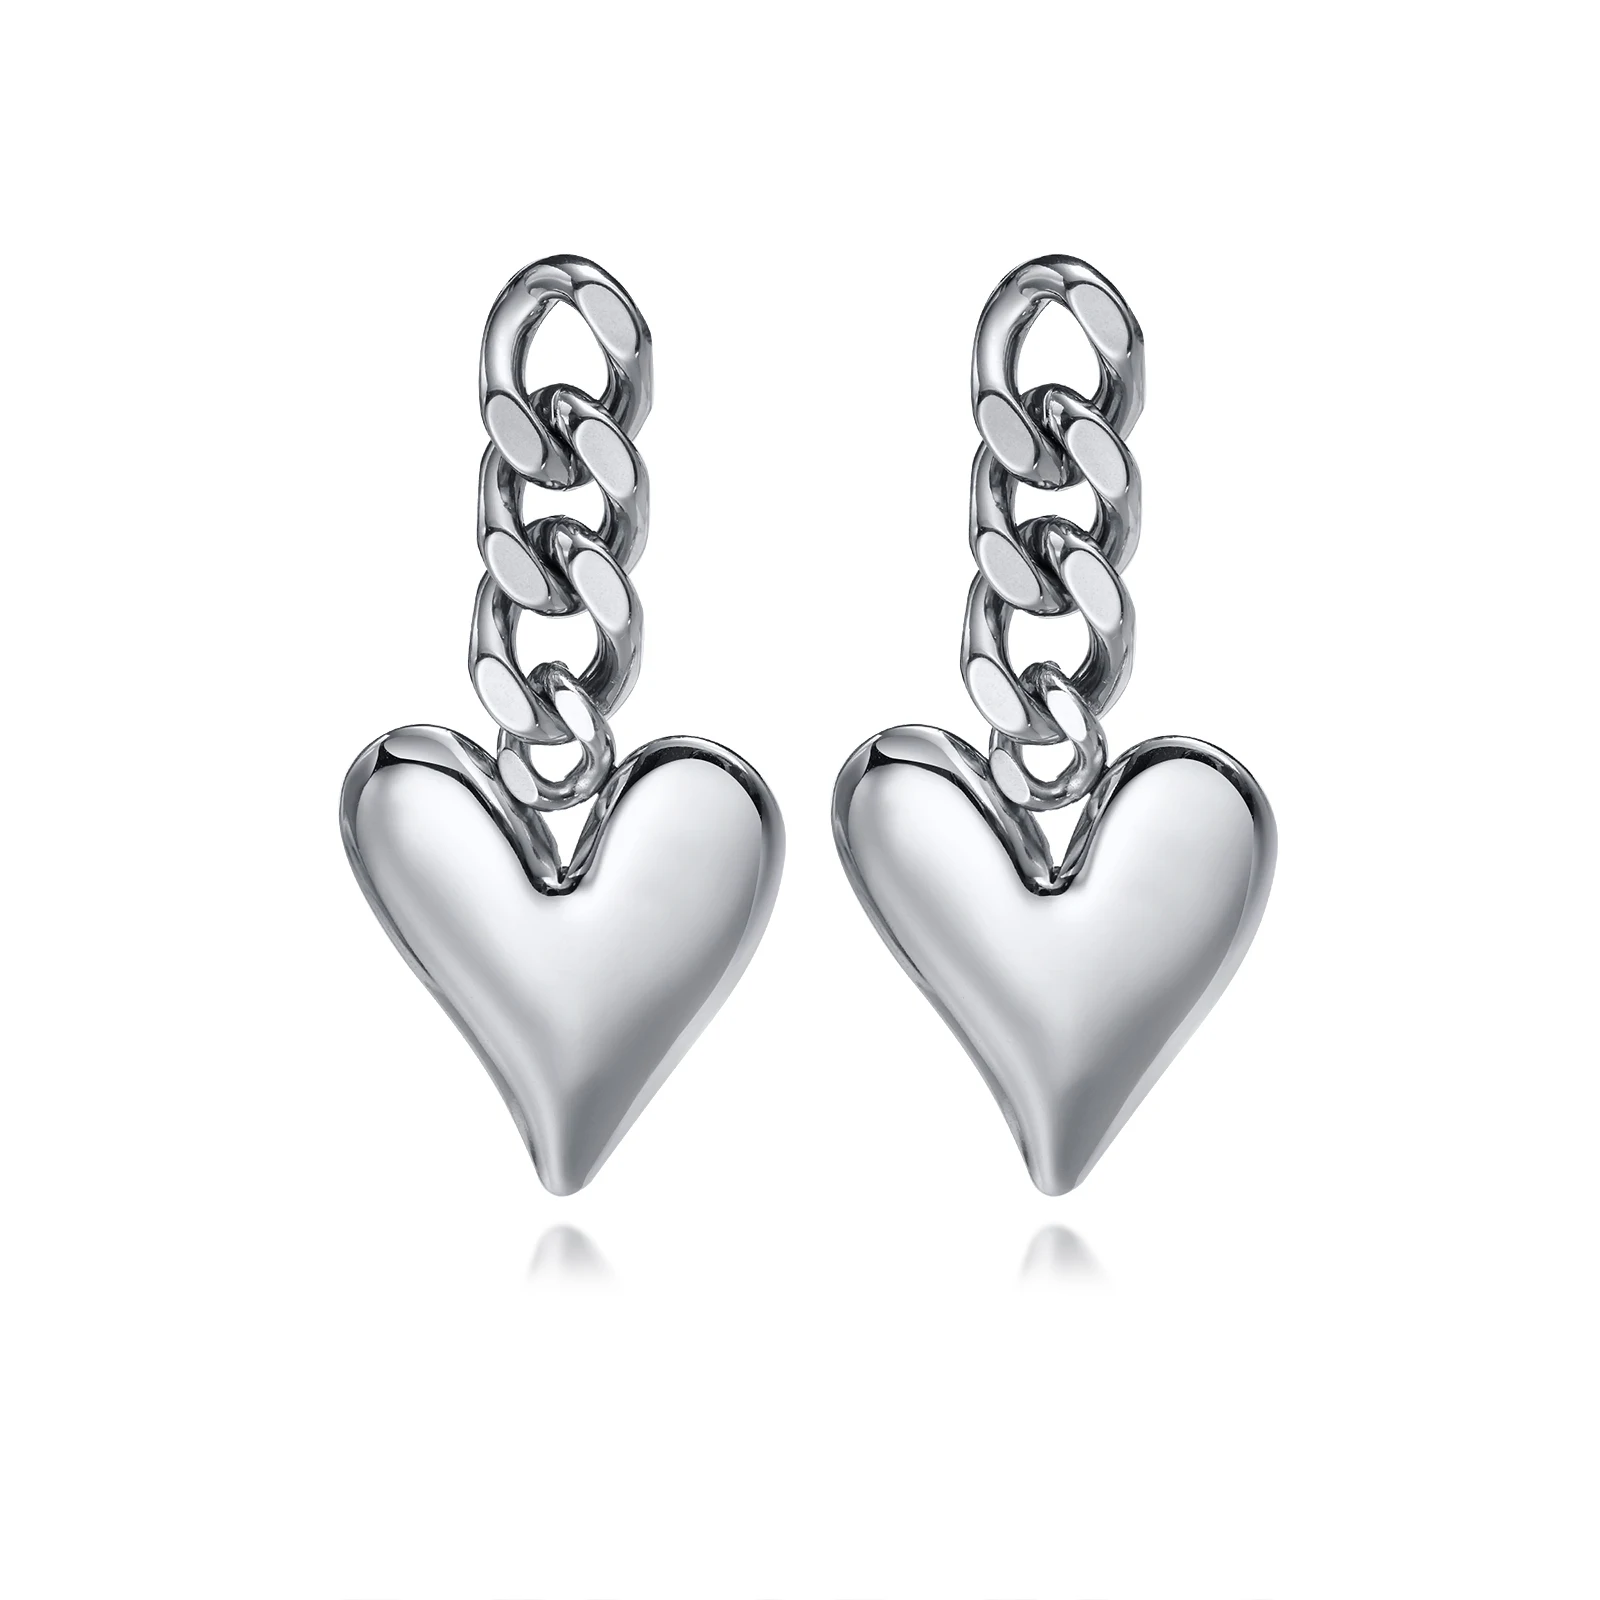 

New Trendy Heart Charm Dangle Earrings for Women Girls,Never Fade Silver Color Stainless Steel Love Gifts Jewelry